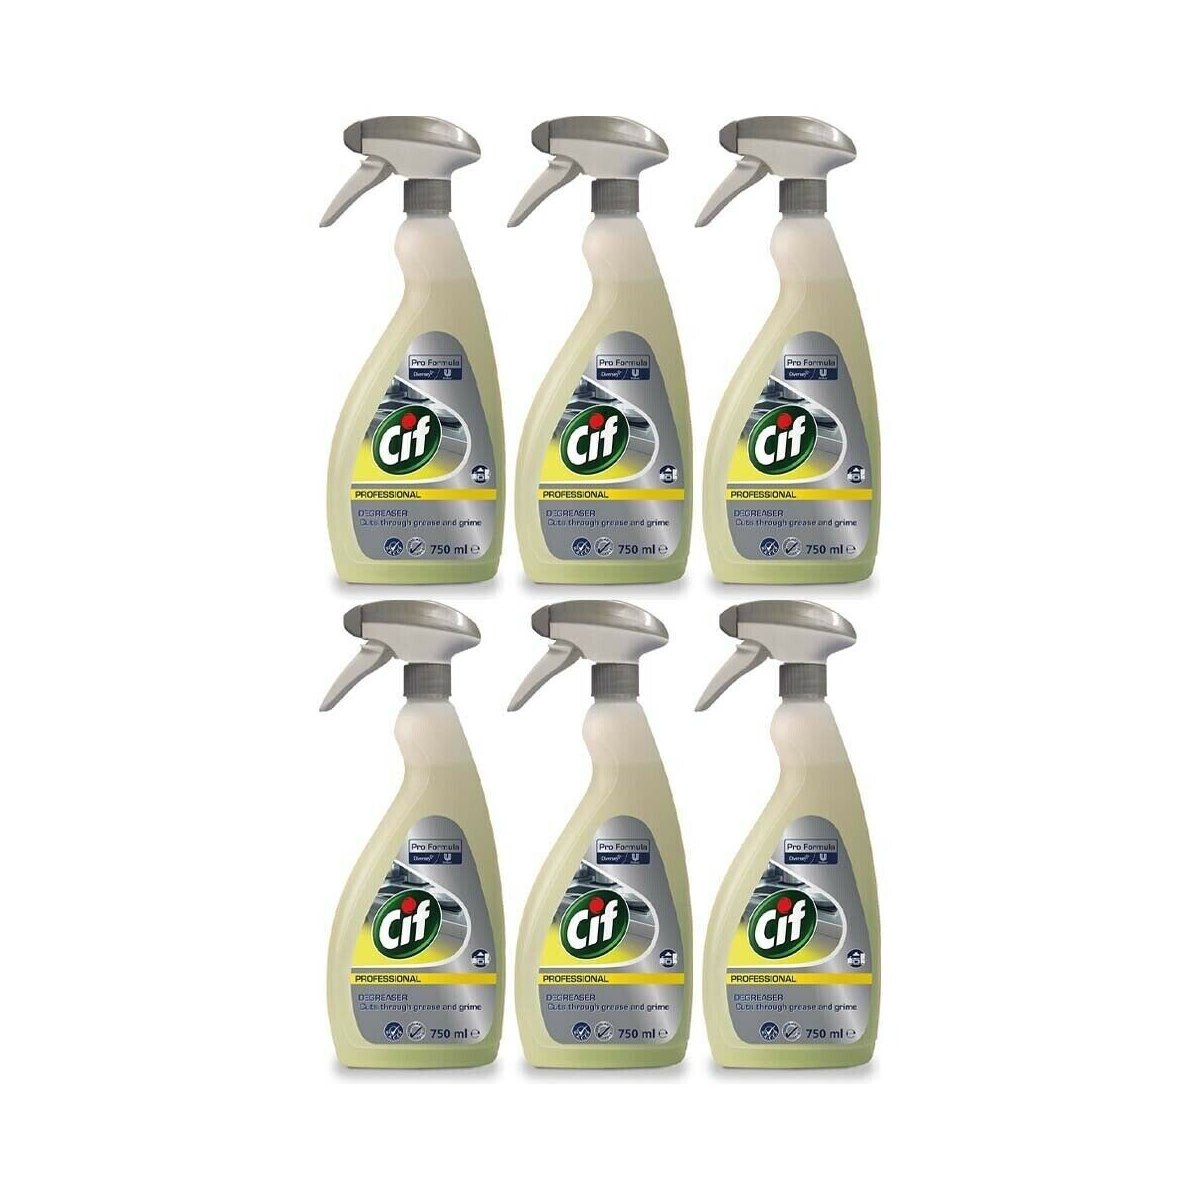 Case of 6 x Cif Professional Degreaser 750ml